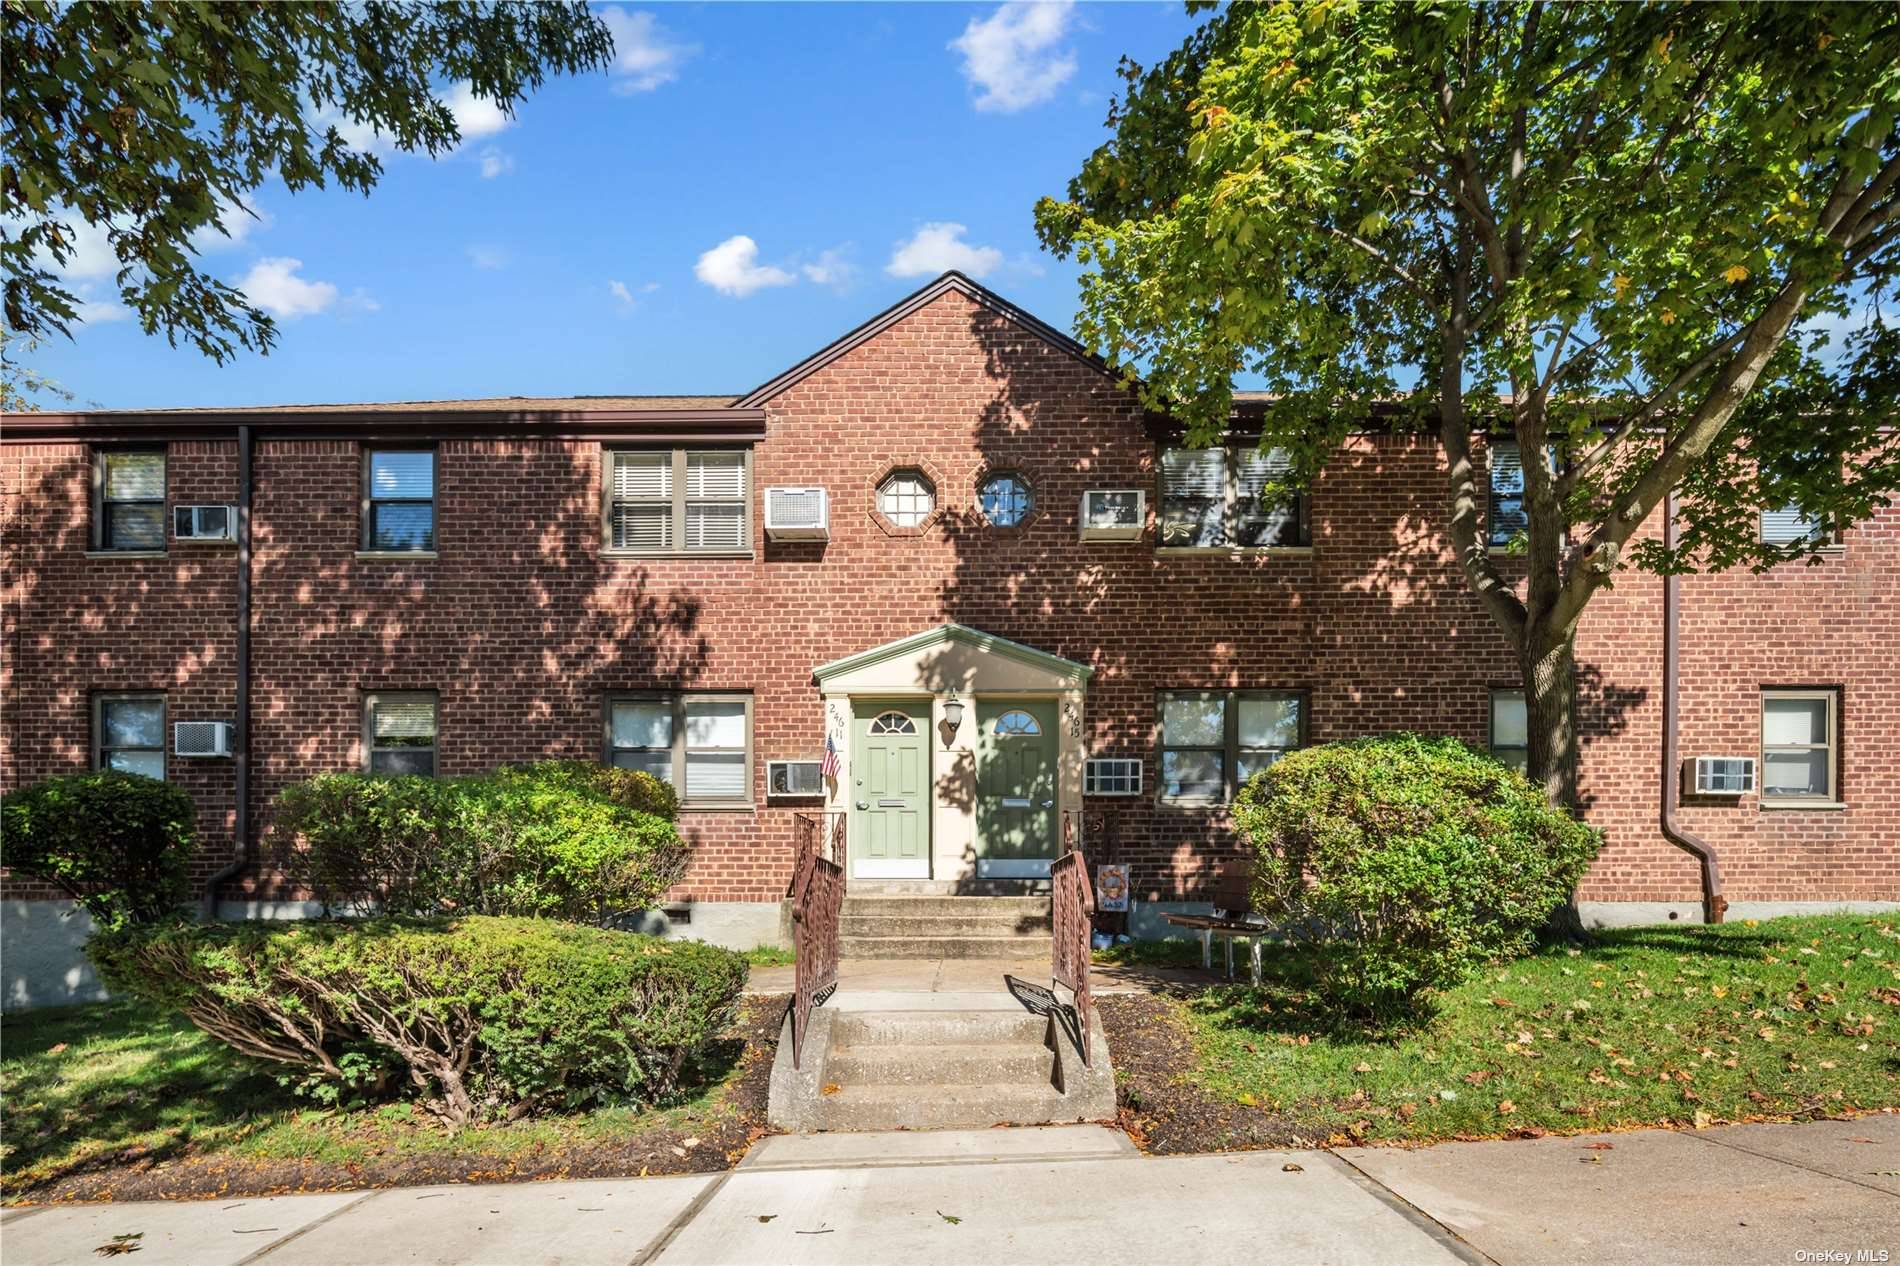 Welcome to this rare 3 bedroom corner unit located in the coveted Beech Hills Community of Douglaston.